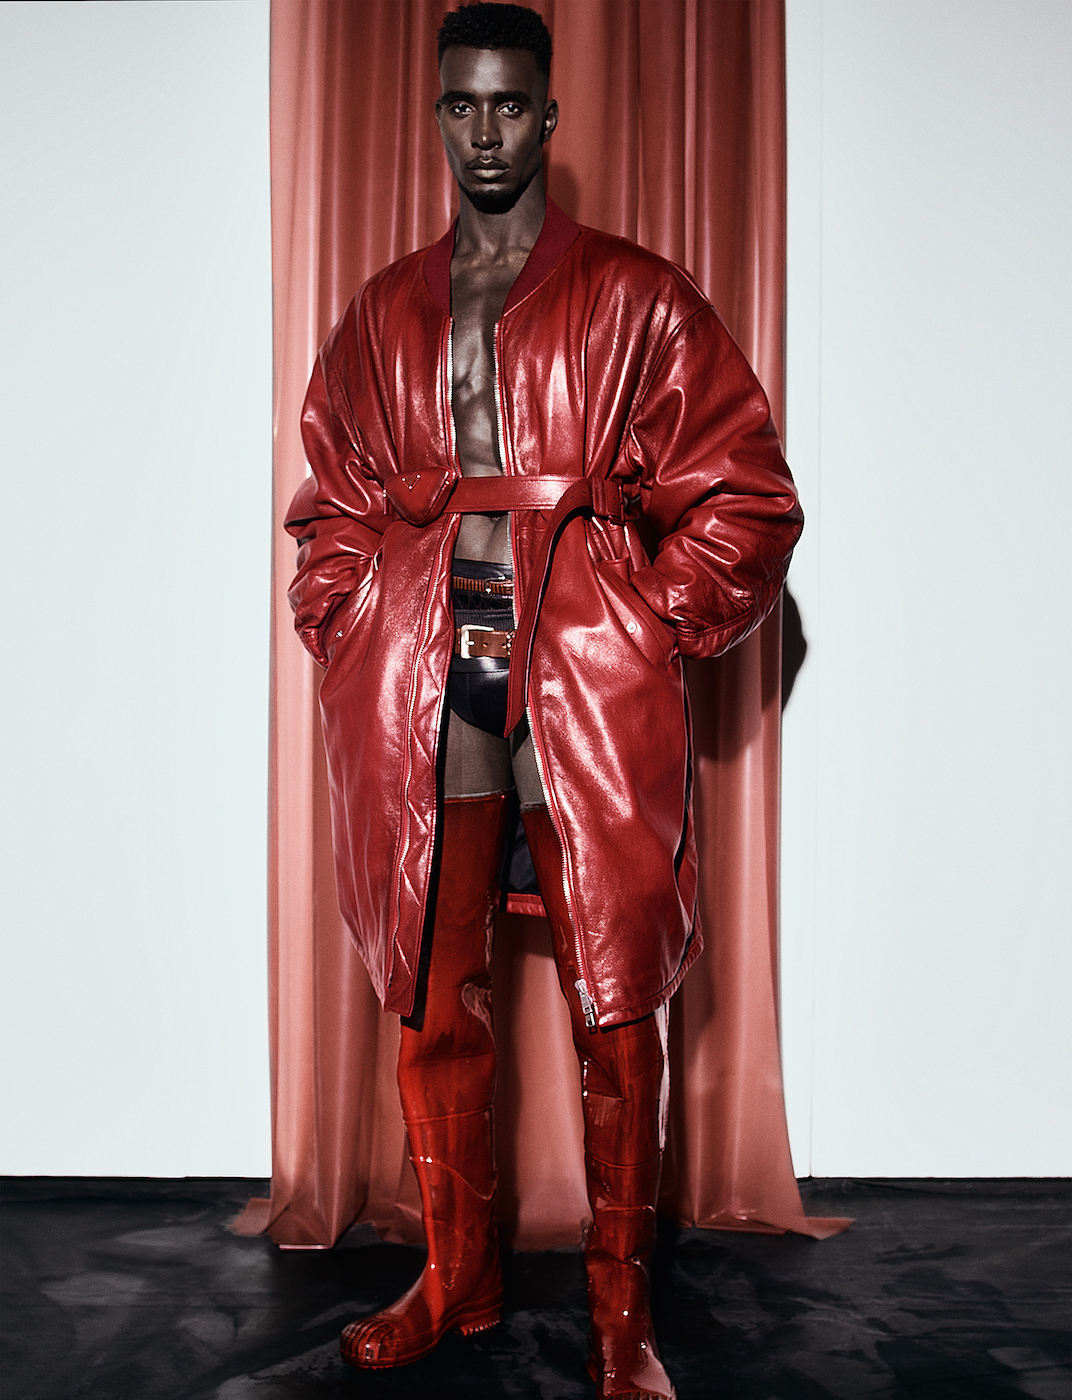  Clothing <strong>Prada</strong>, Shoes <strong>Maison Margiela</strong>, Belts stylist’s own